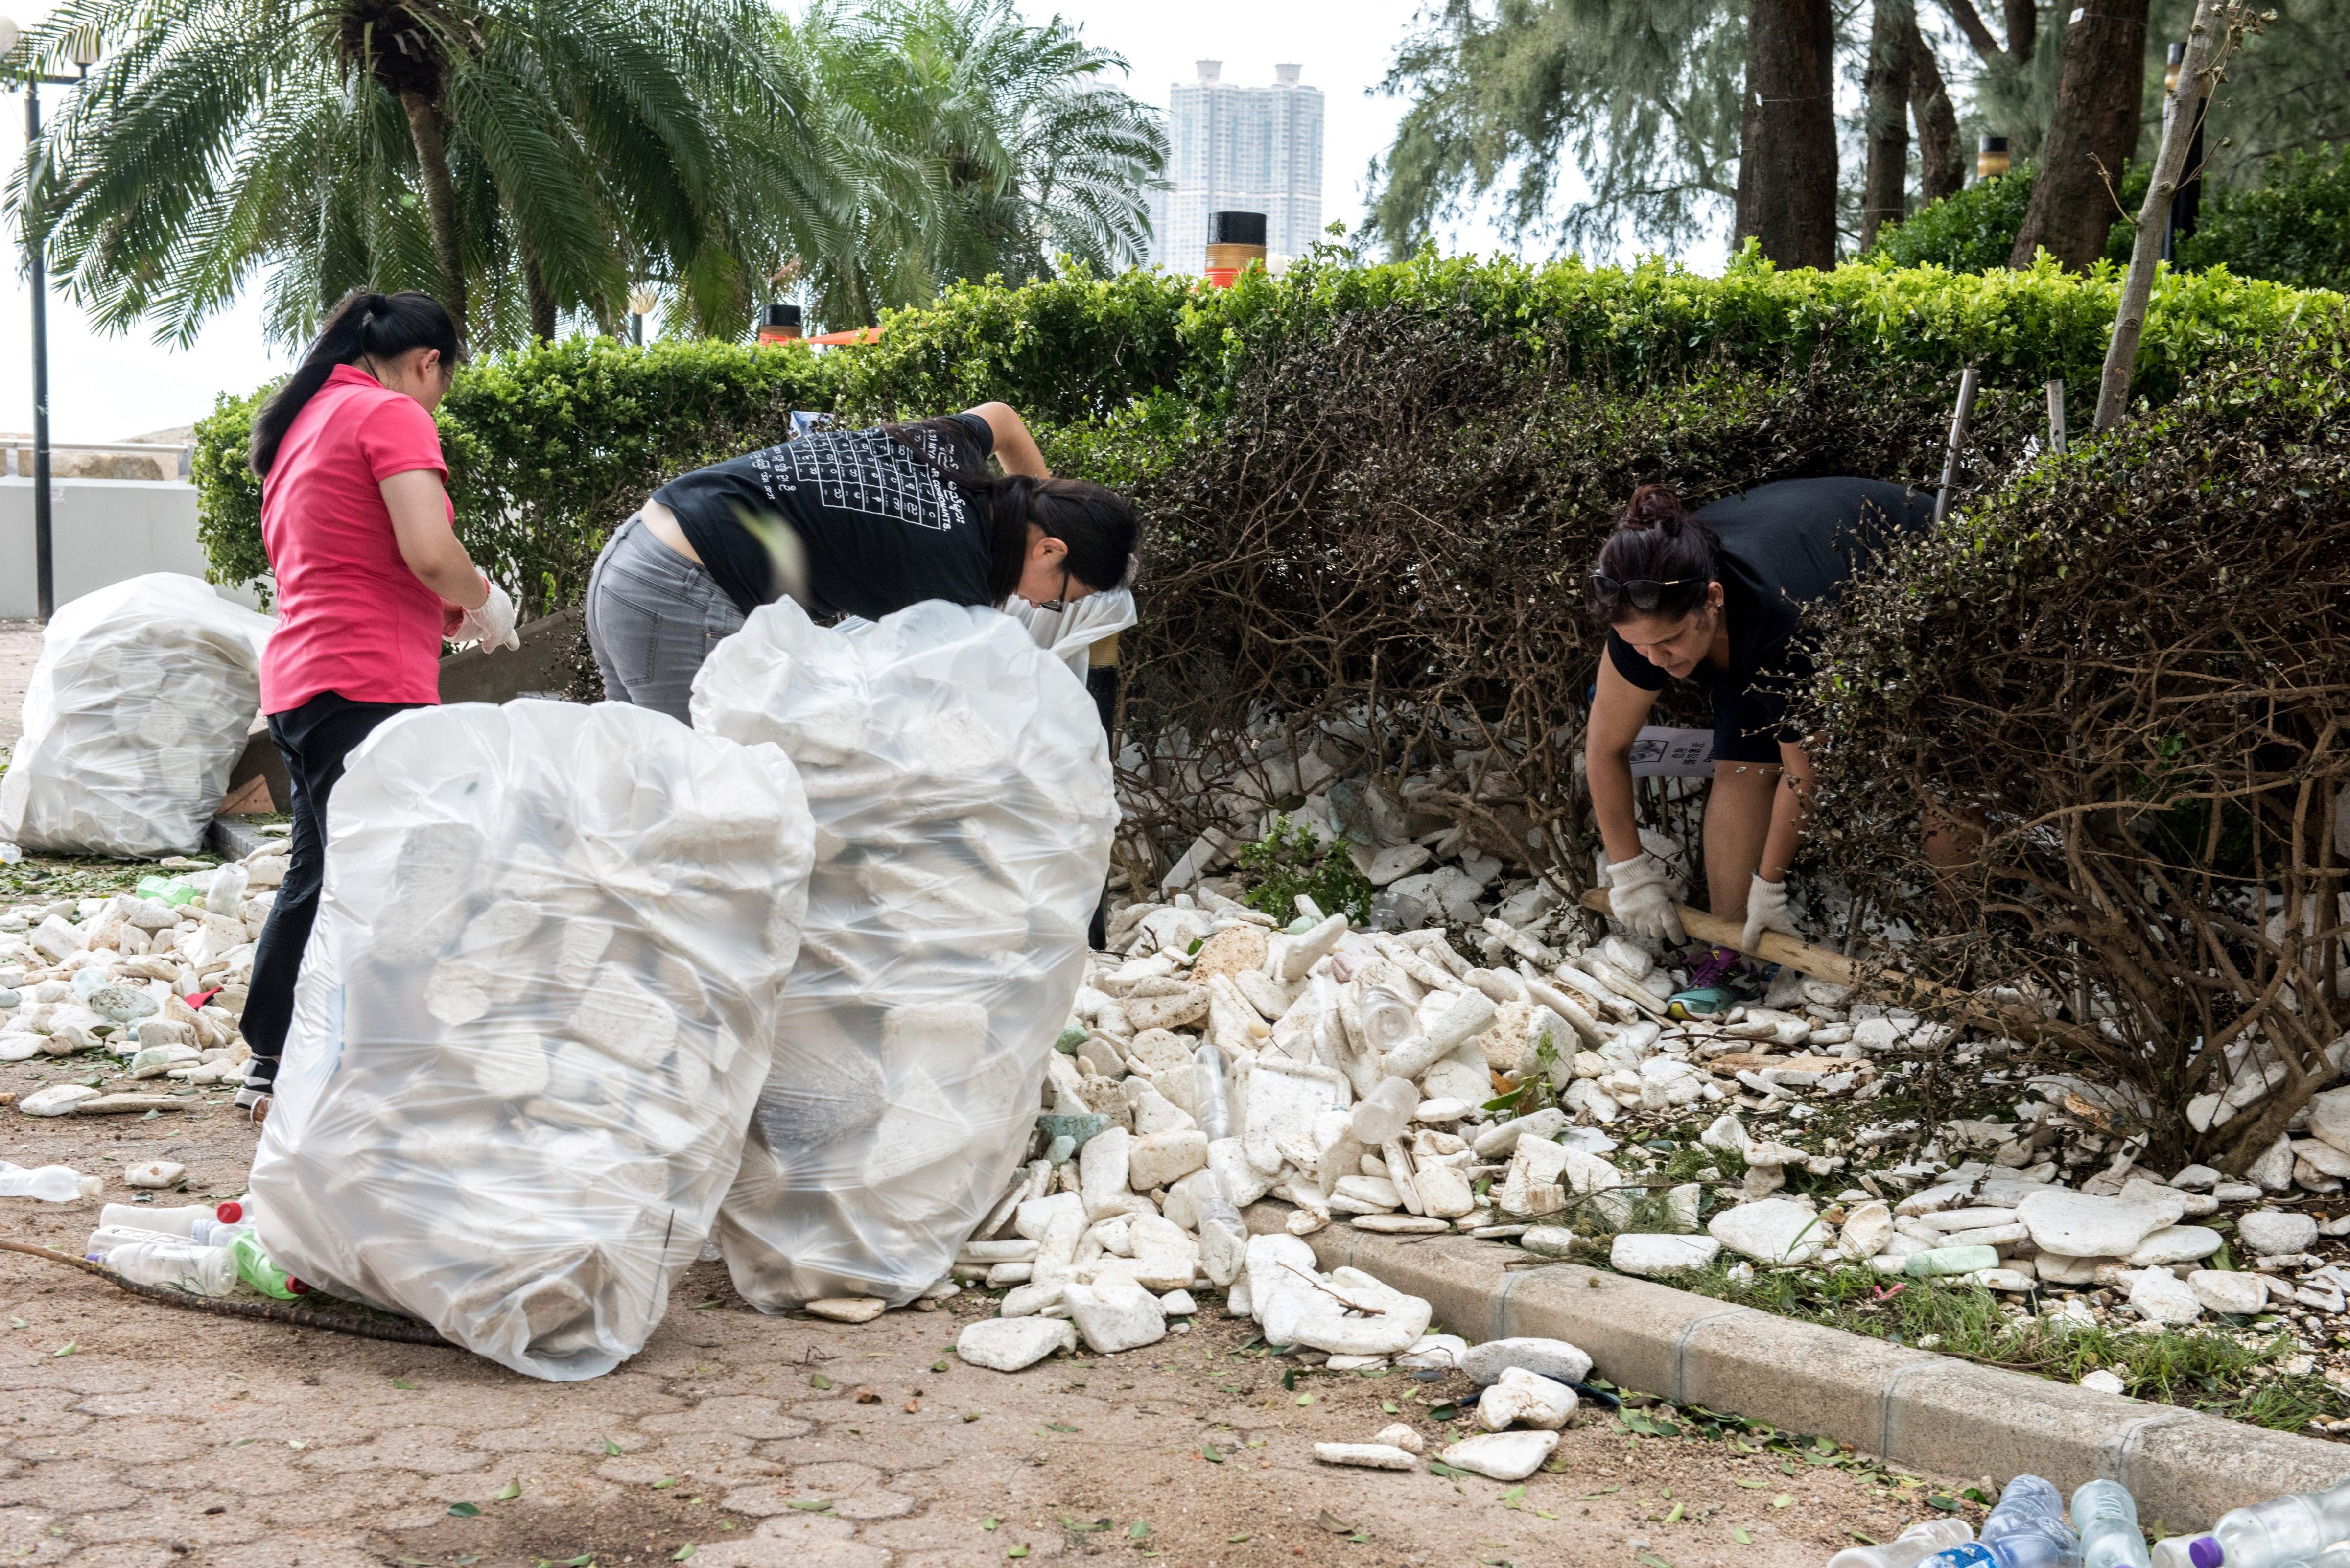 Residents and government workers pick up polystyrene and other rubbish in Heng Fa Chuen, Hong Kong, Aug. 24, 2017. (Jayne Russell—AFP/Getty Images)